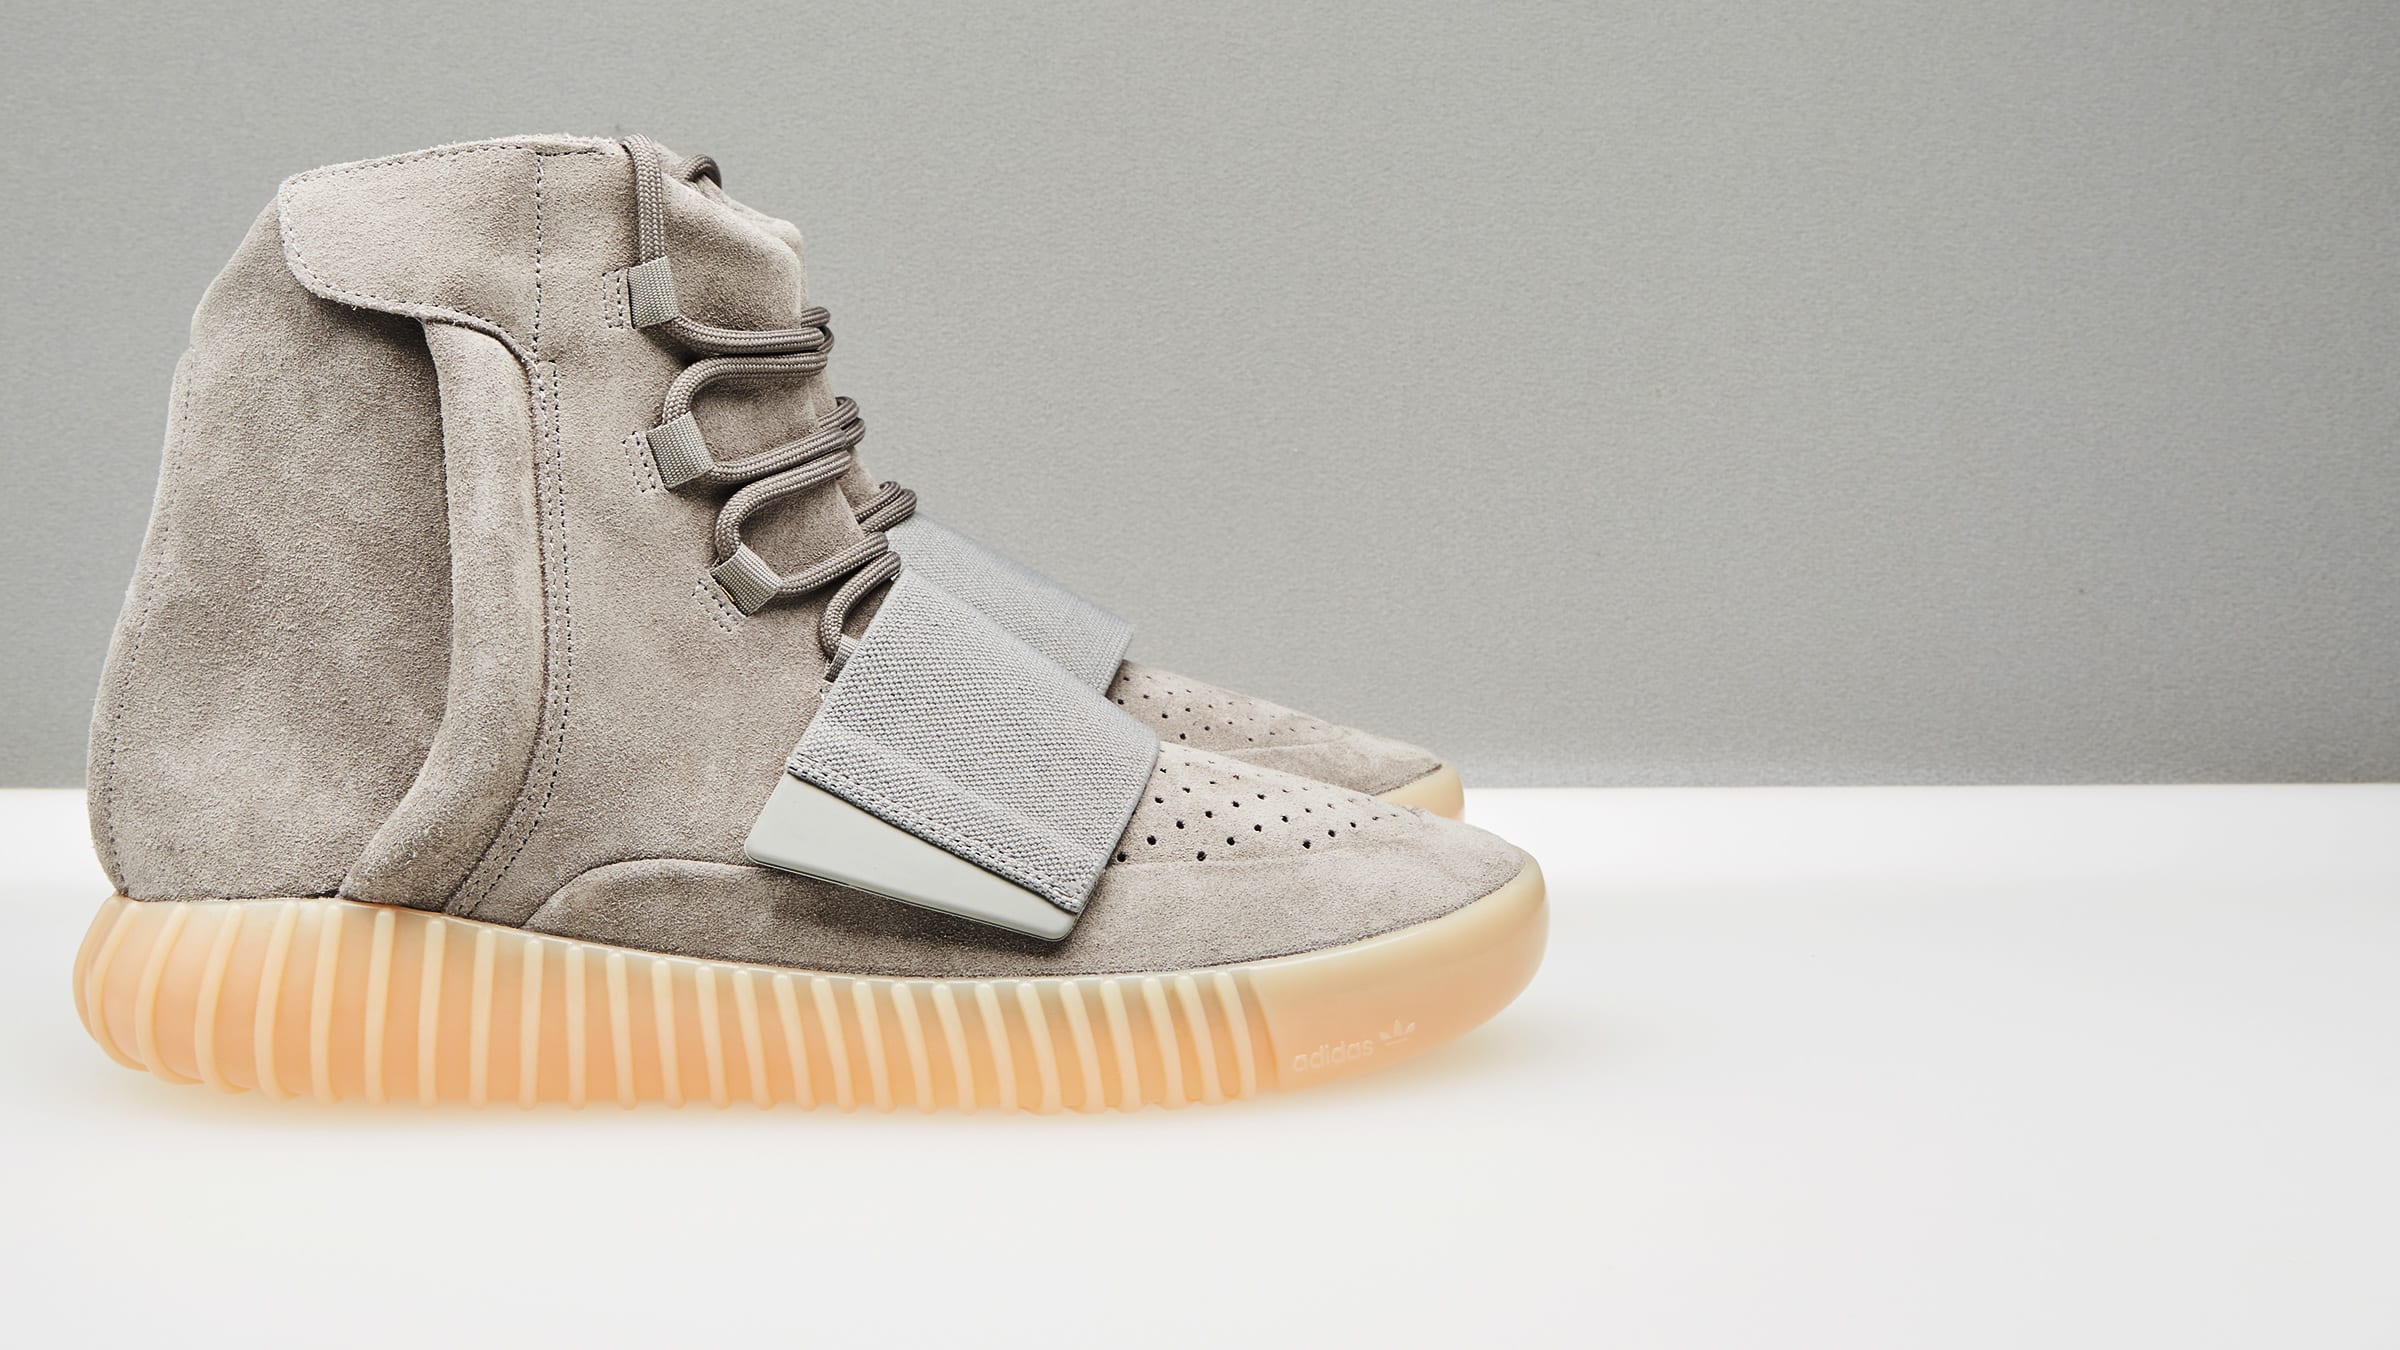 Yeezy Boost 750 (Light Grey & Gum) | END. Launches